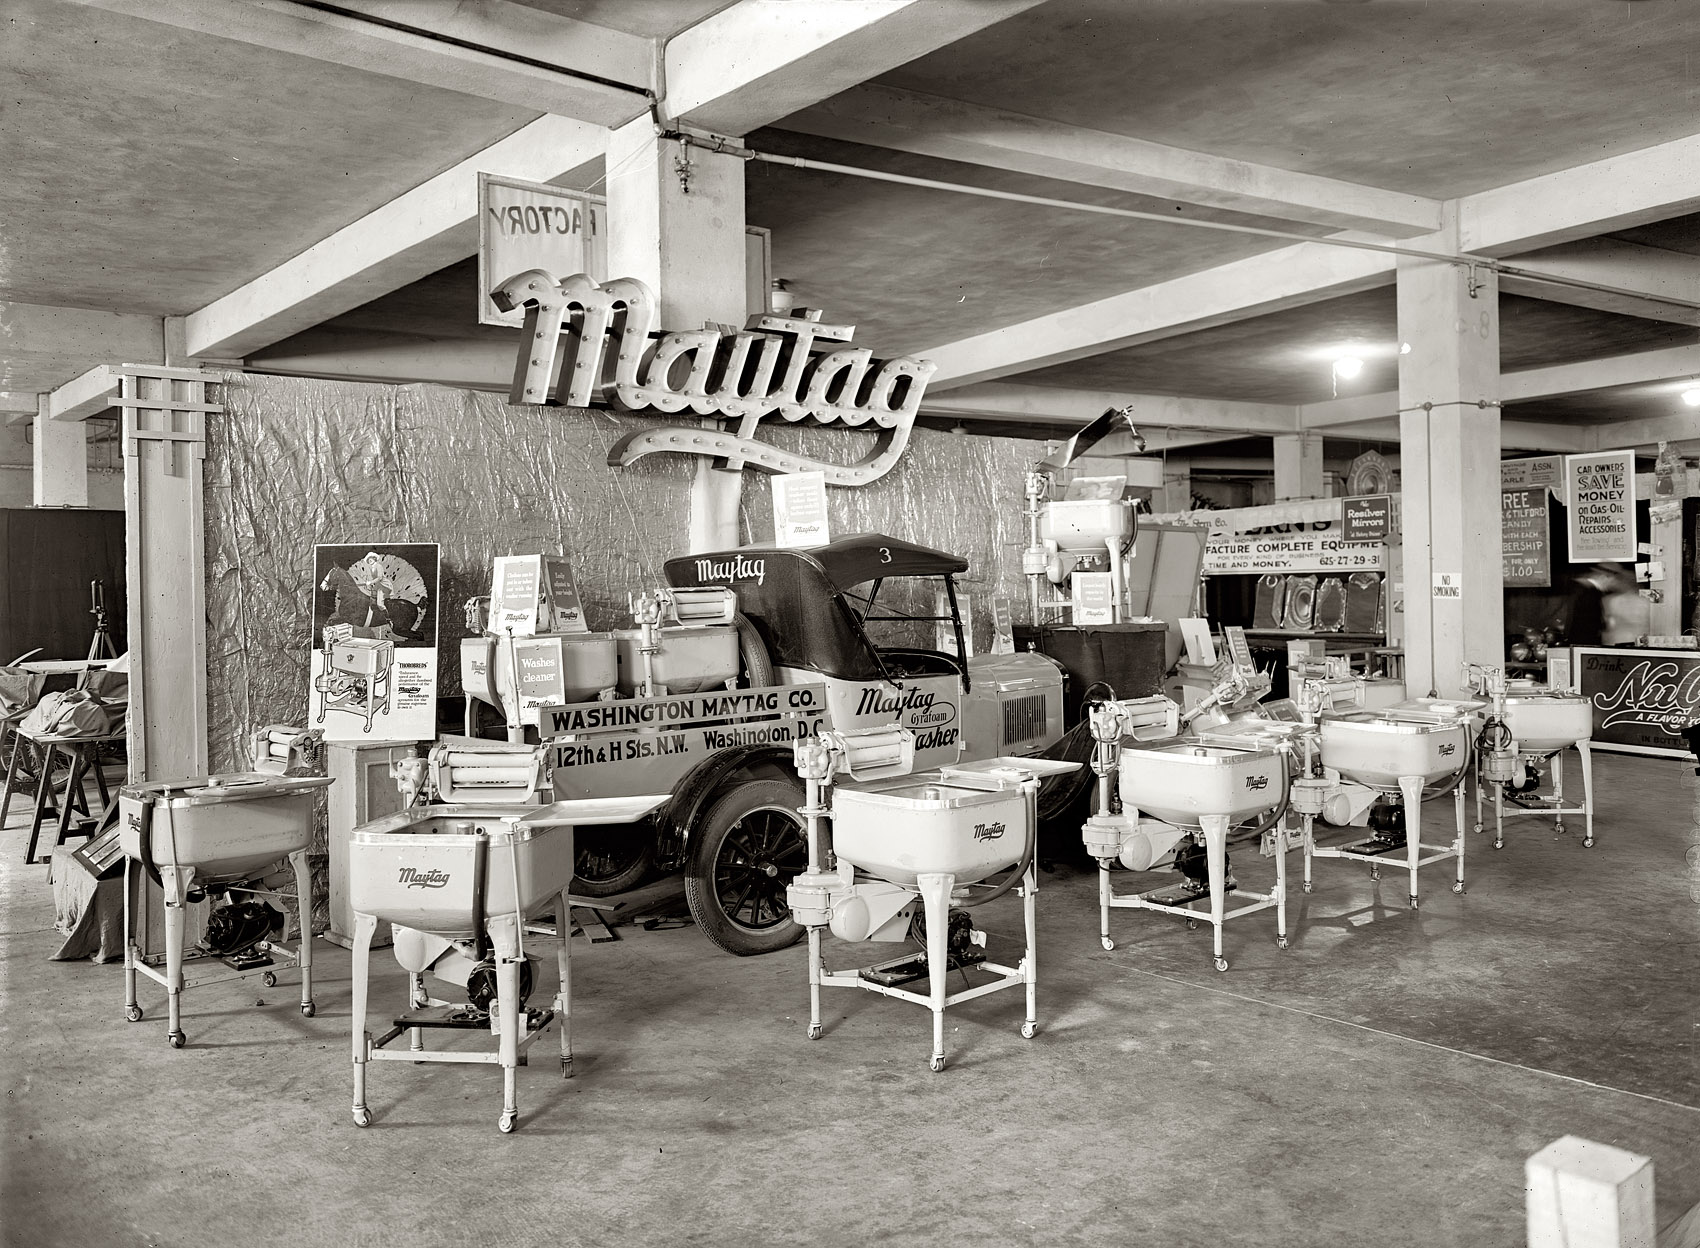 Washington, D.C., 1926. "Maytag Co. display at Industrial Exposition." 8x10 glass negative, National Photo Company Collection. View full size.